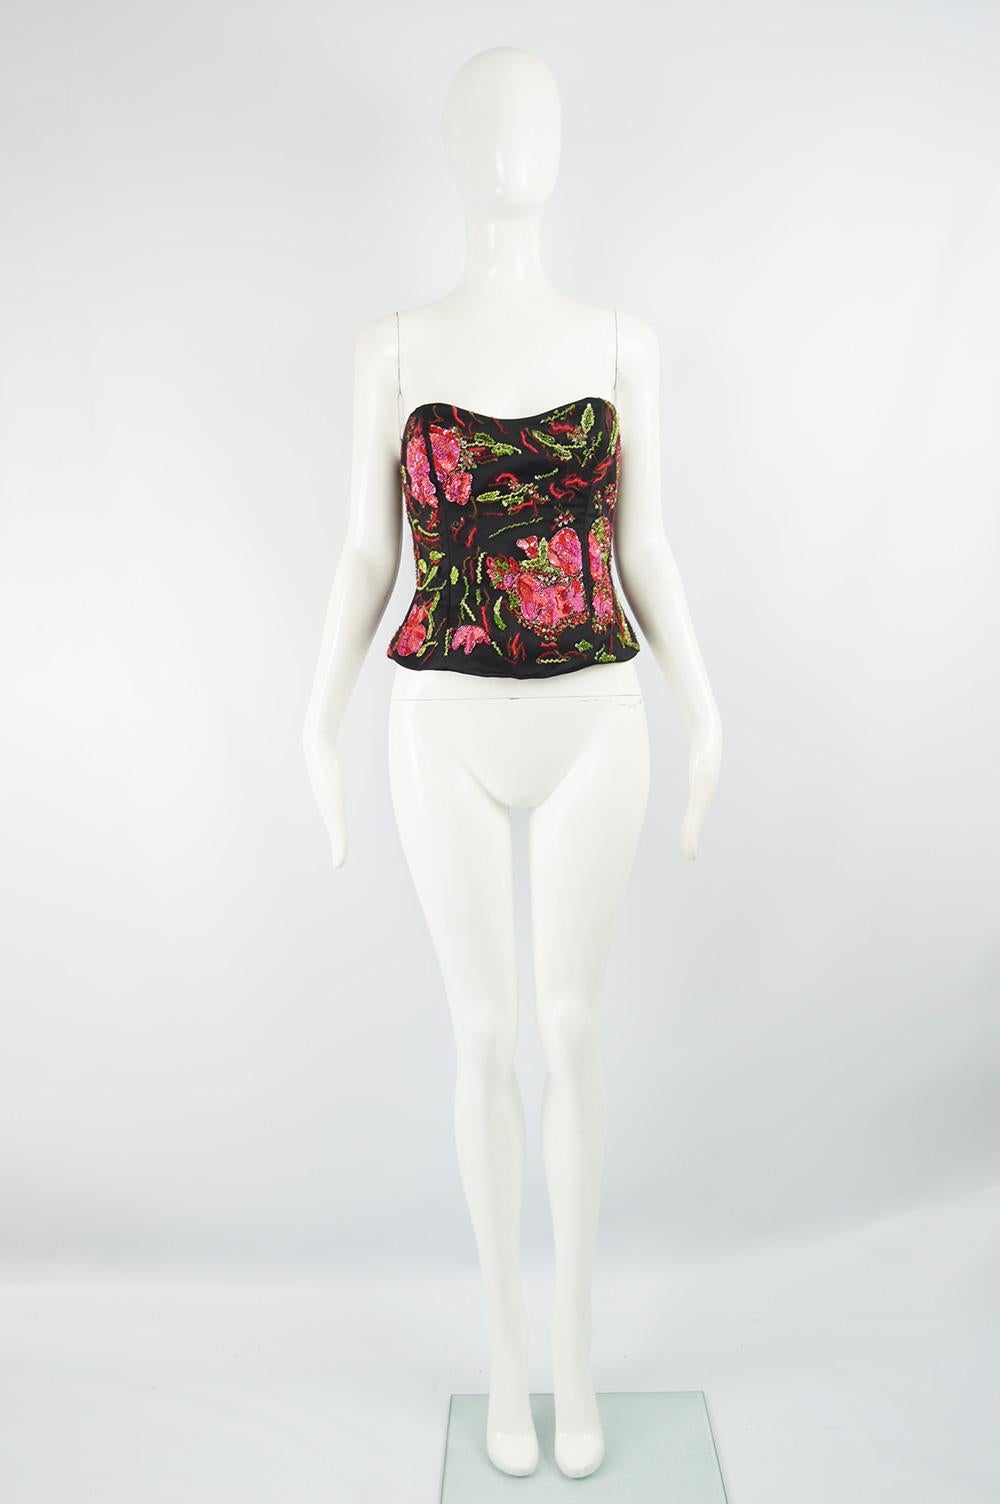 A fabulous women's bustier by Armani Collezioni in a black satin with a fine mesh over the top that is heavily embellished with pink sequins, red fuzzy embroidery and green floral beading. Perfect for a party. 

Size: Marked US 6 / IT 42 which